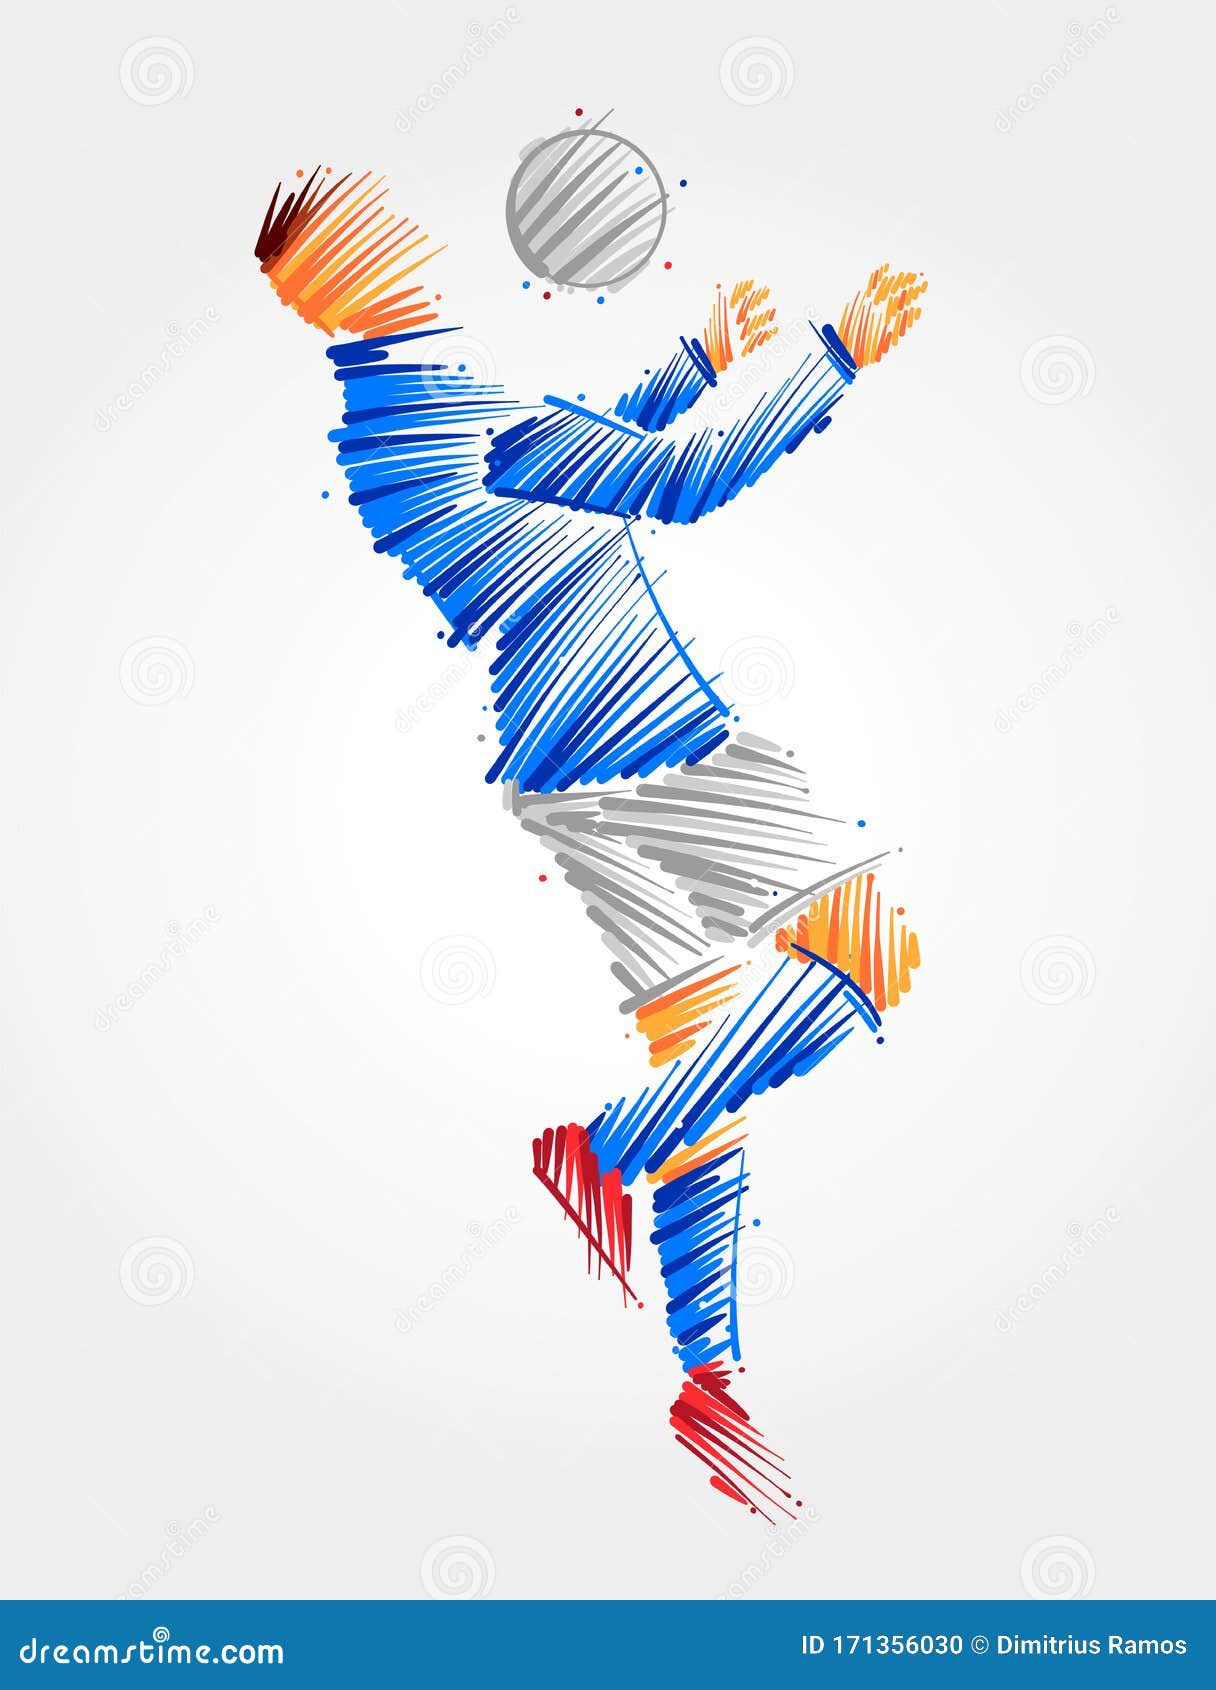 drawing of soccer player jumping to dominate the ball